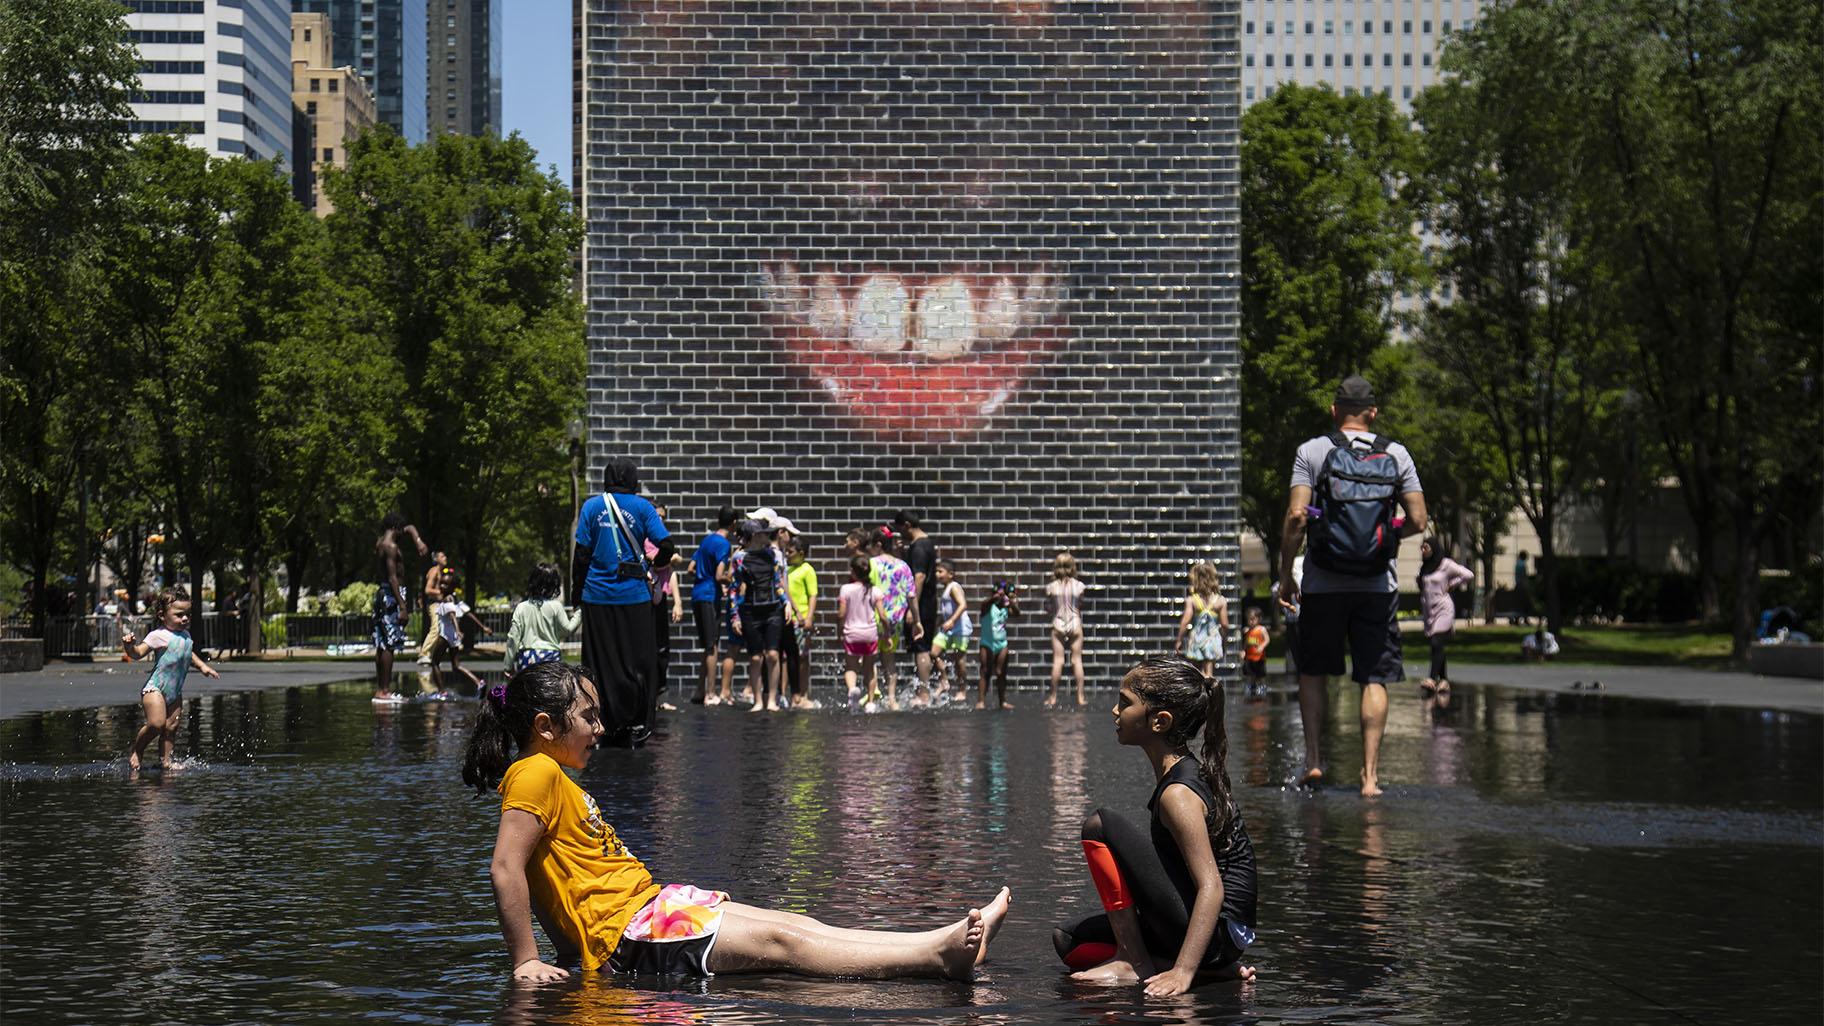 Children play in the Crown Fountain on Michigan Avenue, Tuesday afternoon, June 14, 2022, in Chicago. (Ashlee Rezin / Chicago Sun-Times via AP)